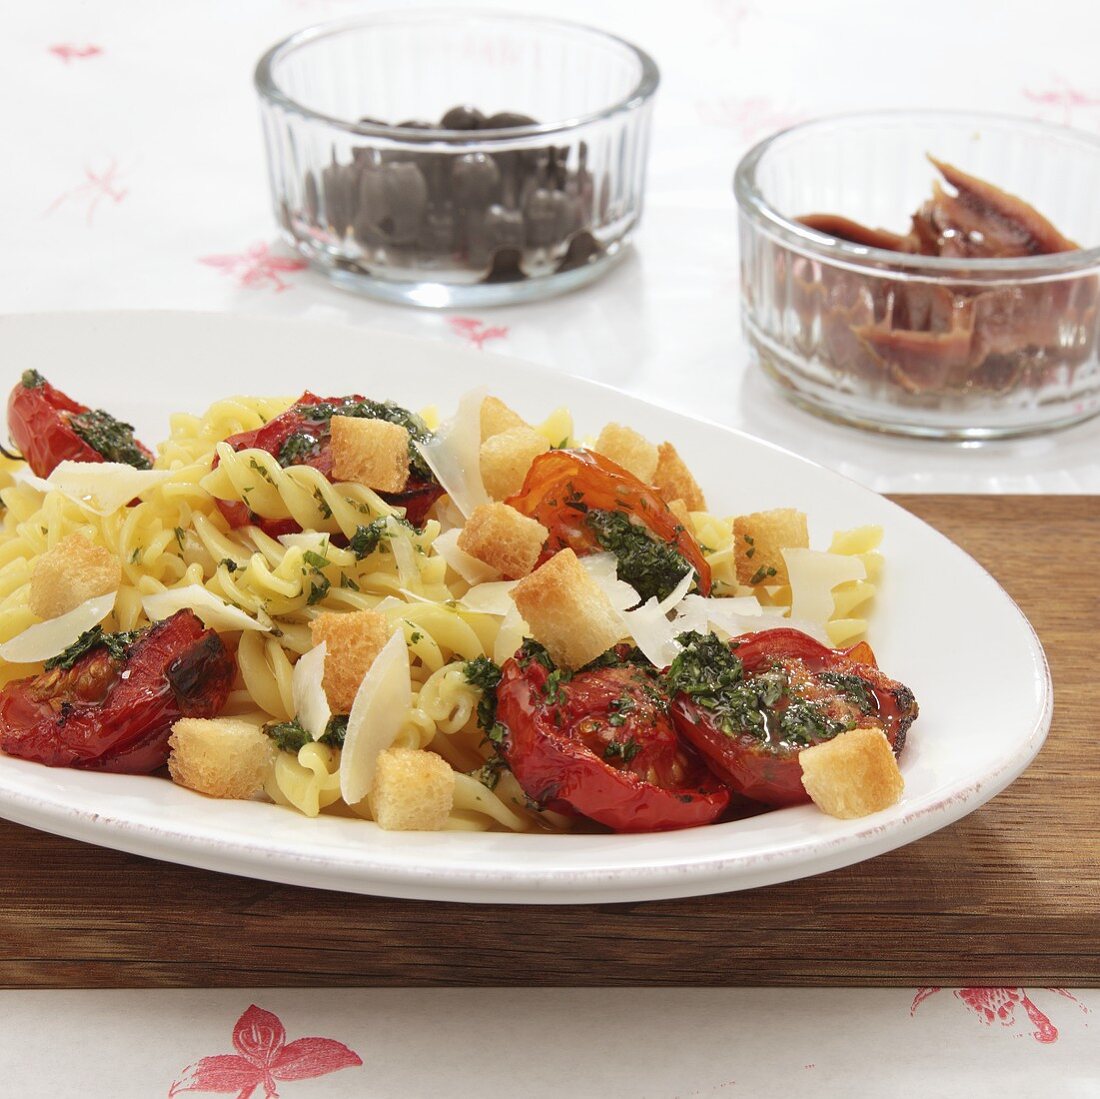 Pasta salad with herb tomatoes, Pecorino cheese and croutons